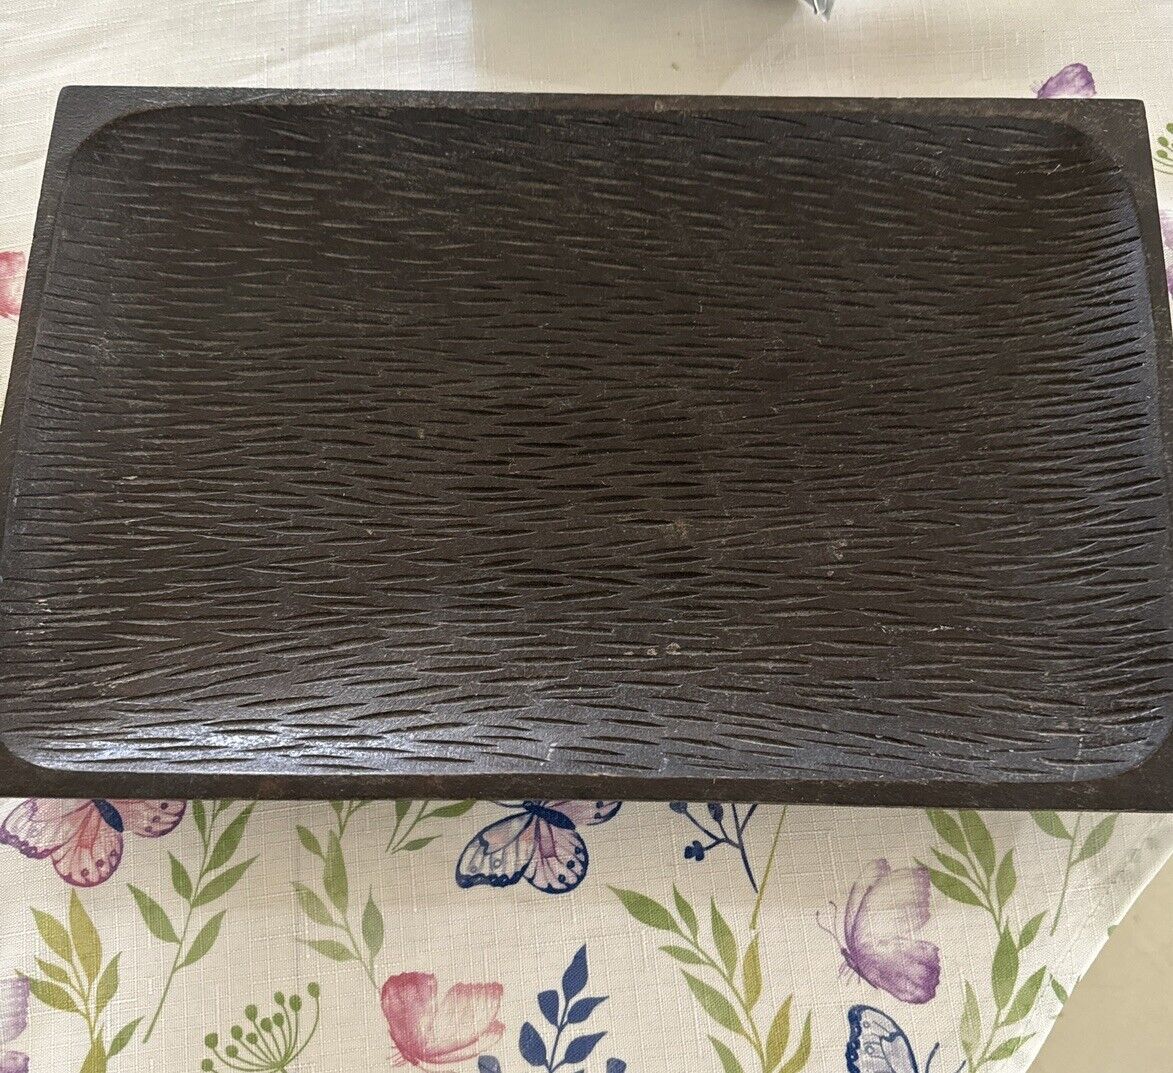 Vintage. Solid Wood Bowl/Tray. Unique Design.  Use For Display, Mail, Money Tray